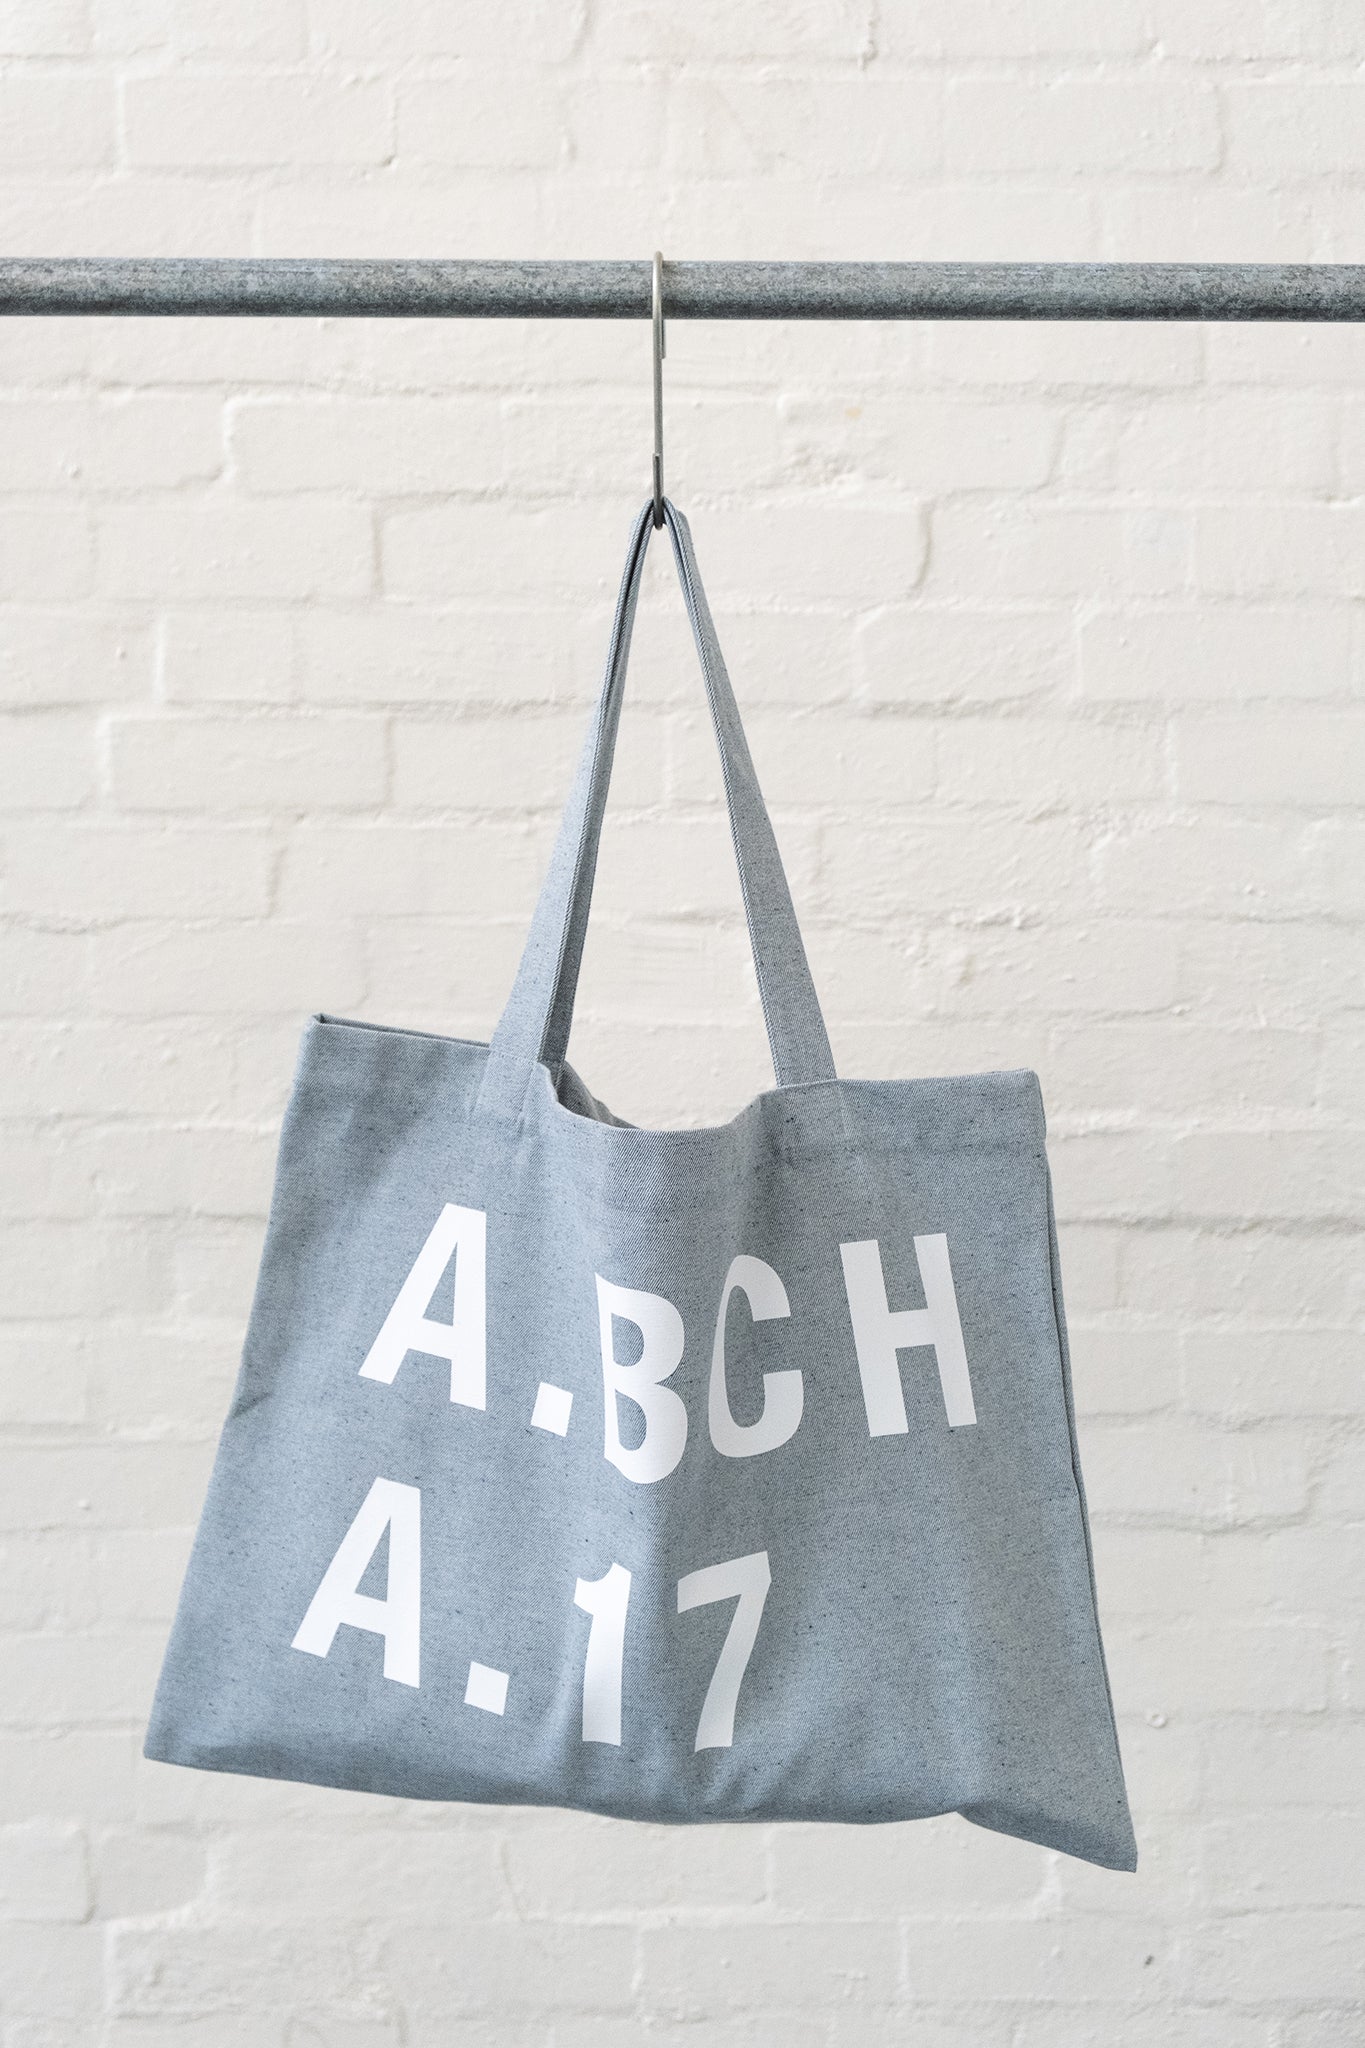 A.BCH A.17 Light Indigo Oversize Tote in Recycled Cotton